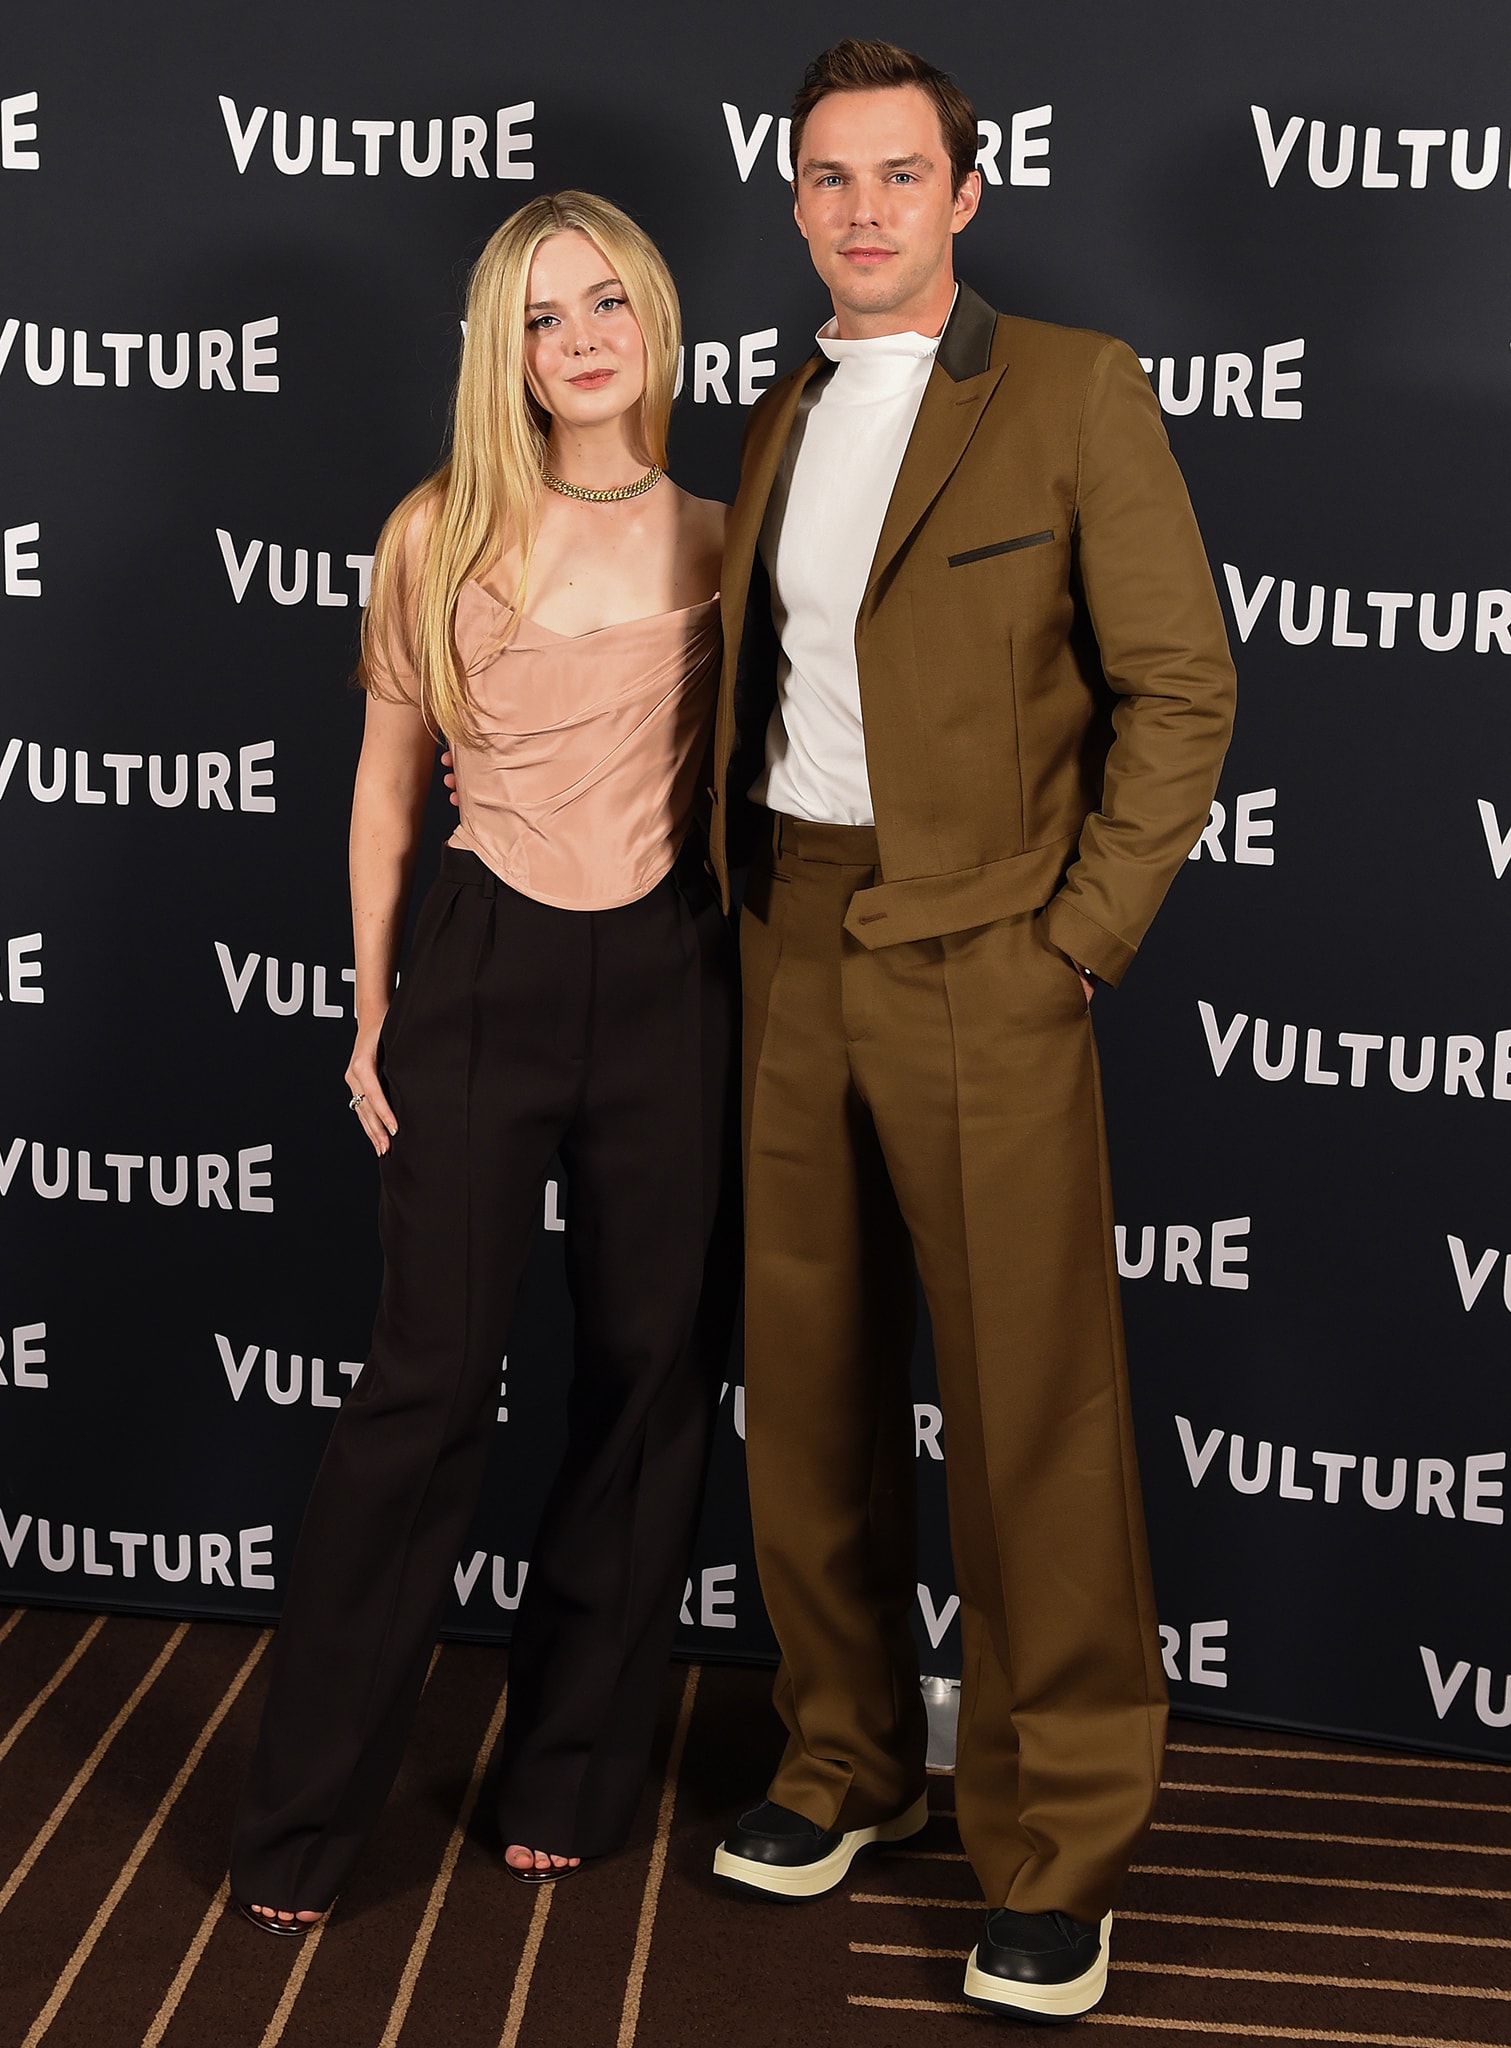 Elle Fanning and Nicholas Hoult at the Vulture Festival 2021 on November 13, 2021